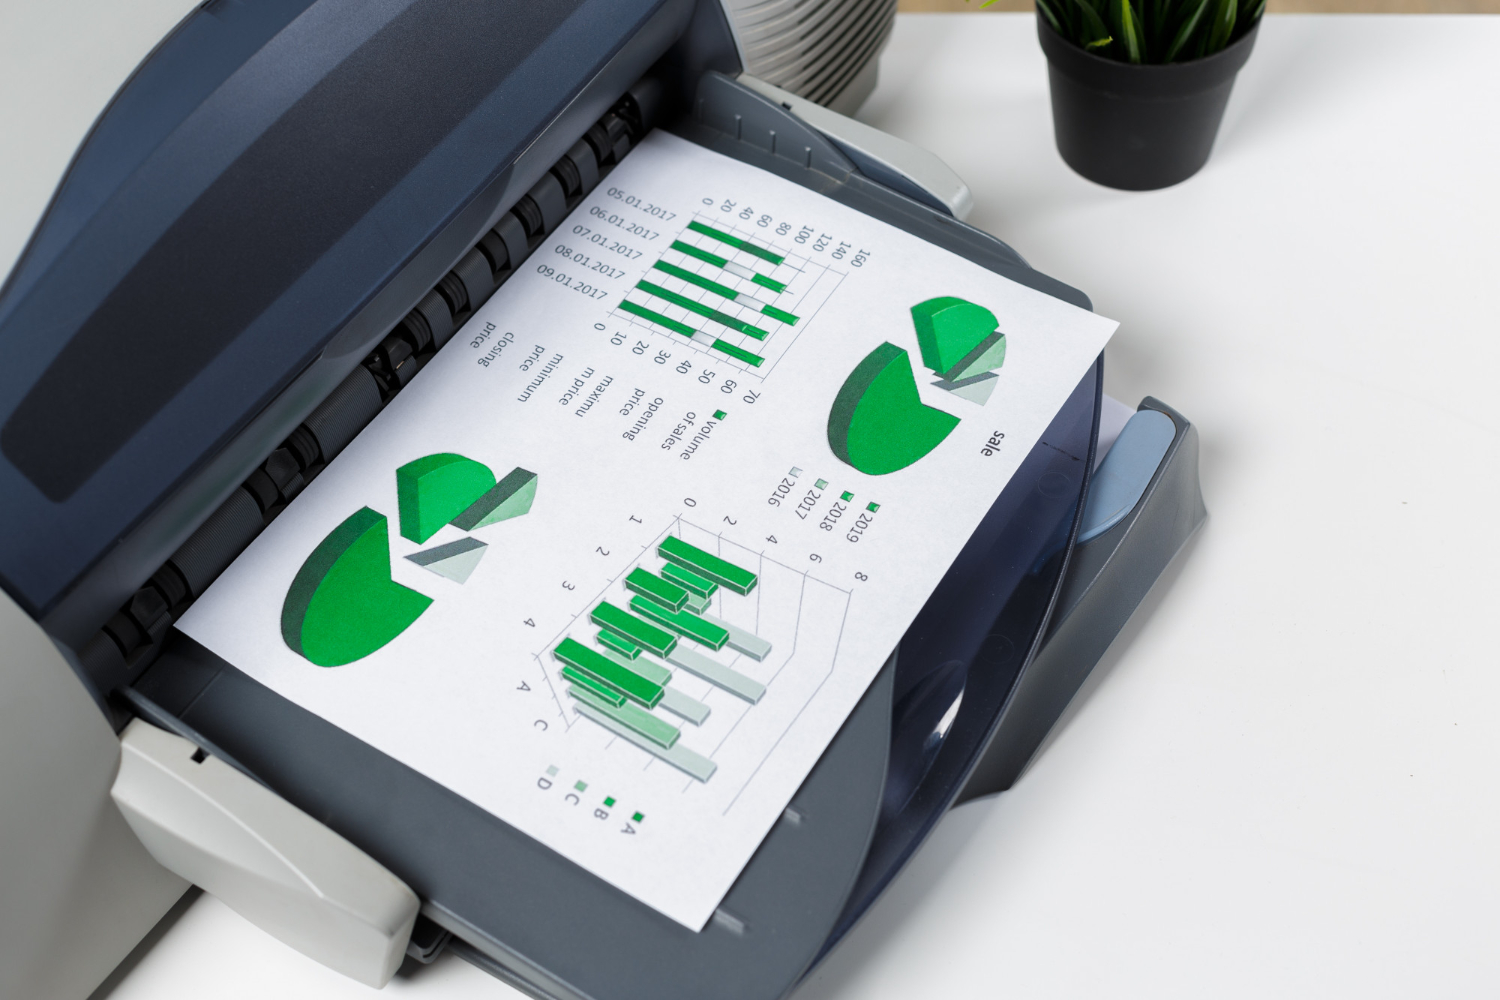 A3 and A4 multifunction printers in an office.